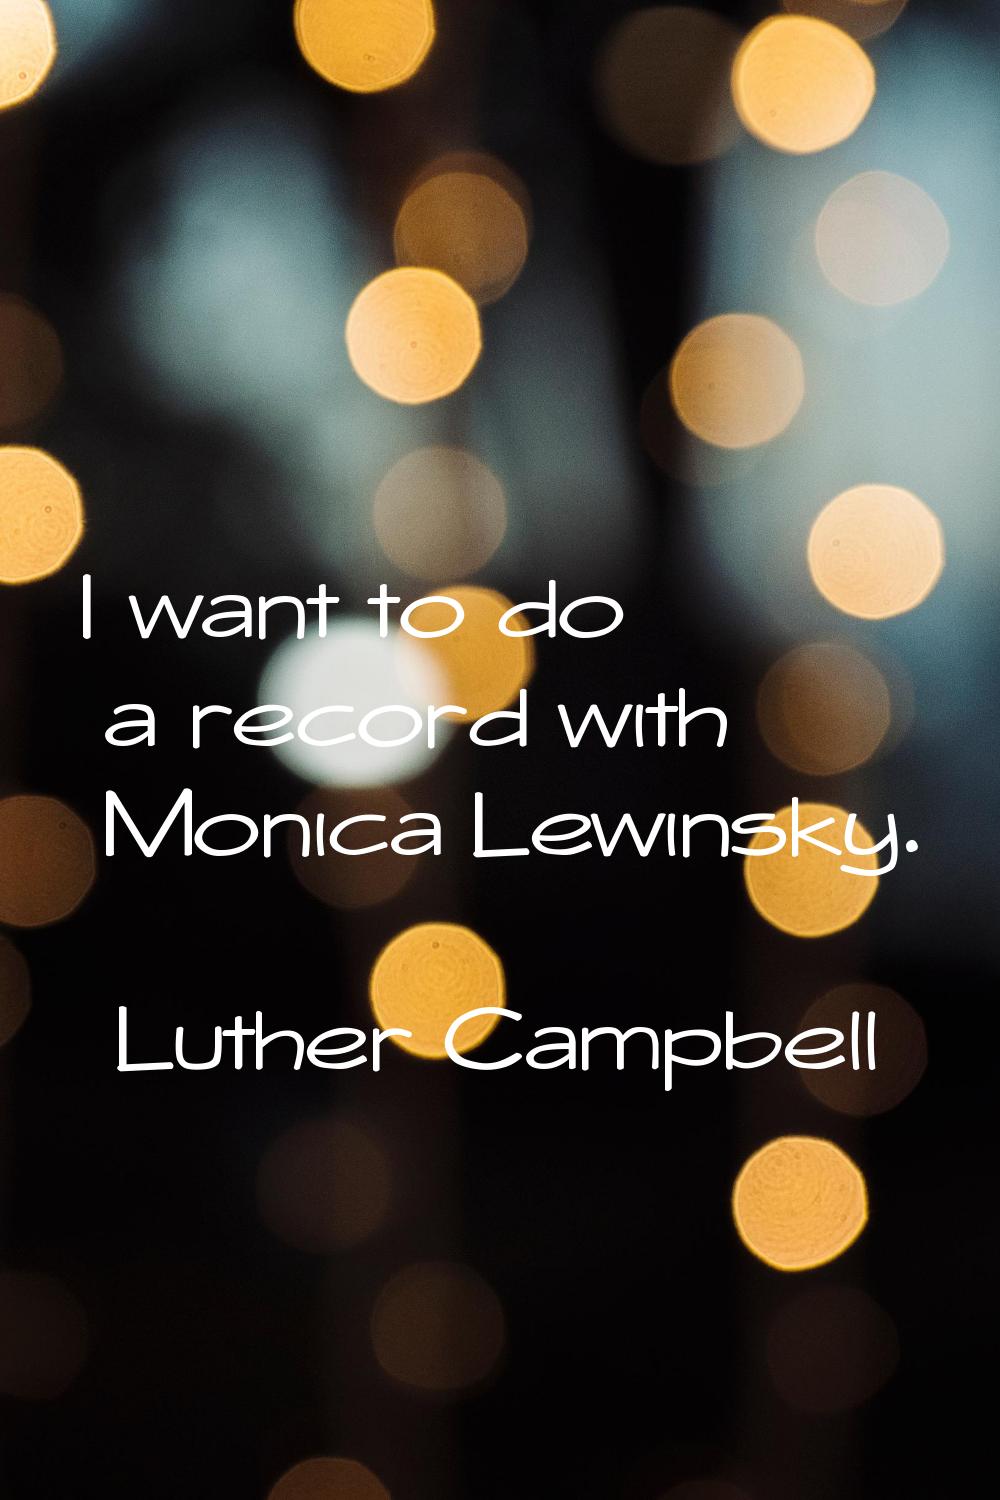 I want to do a record with Monica Lewinsky.